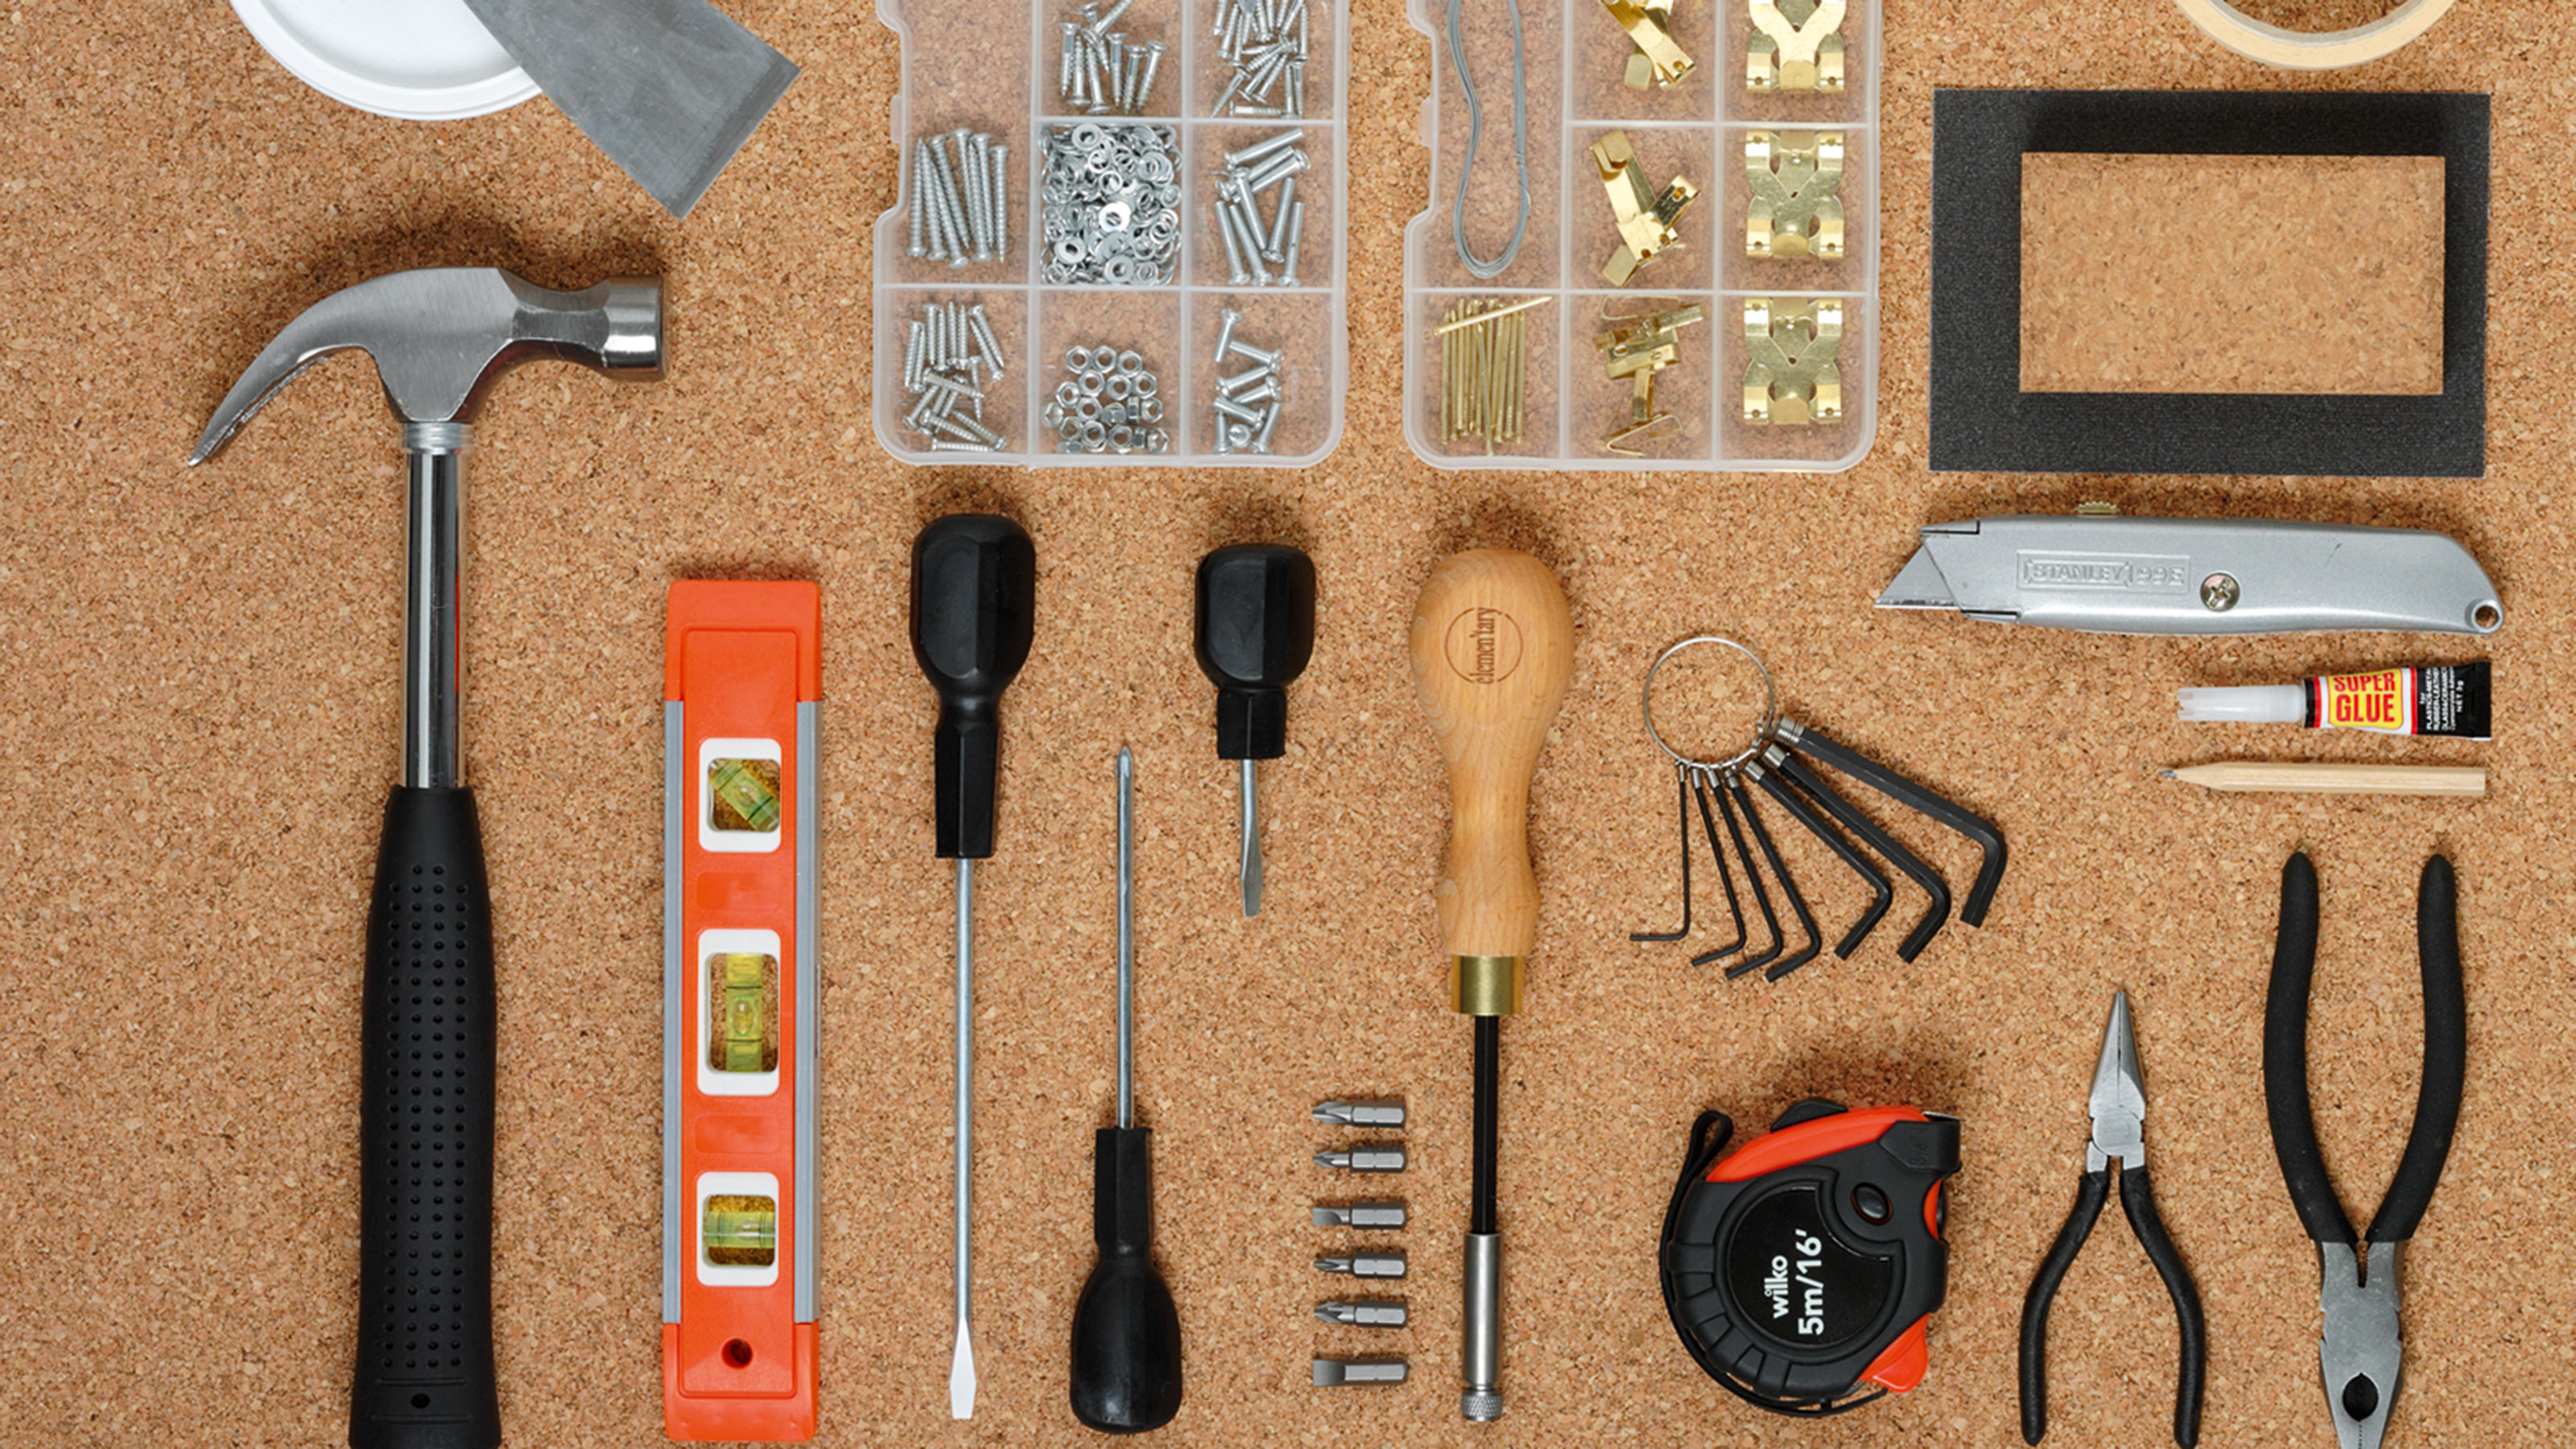 The 15 tools you need for basic home repairs – The Irish Times